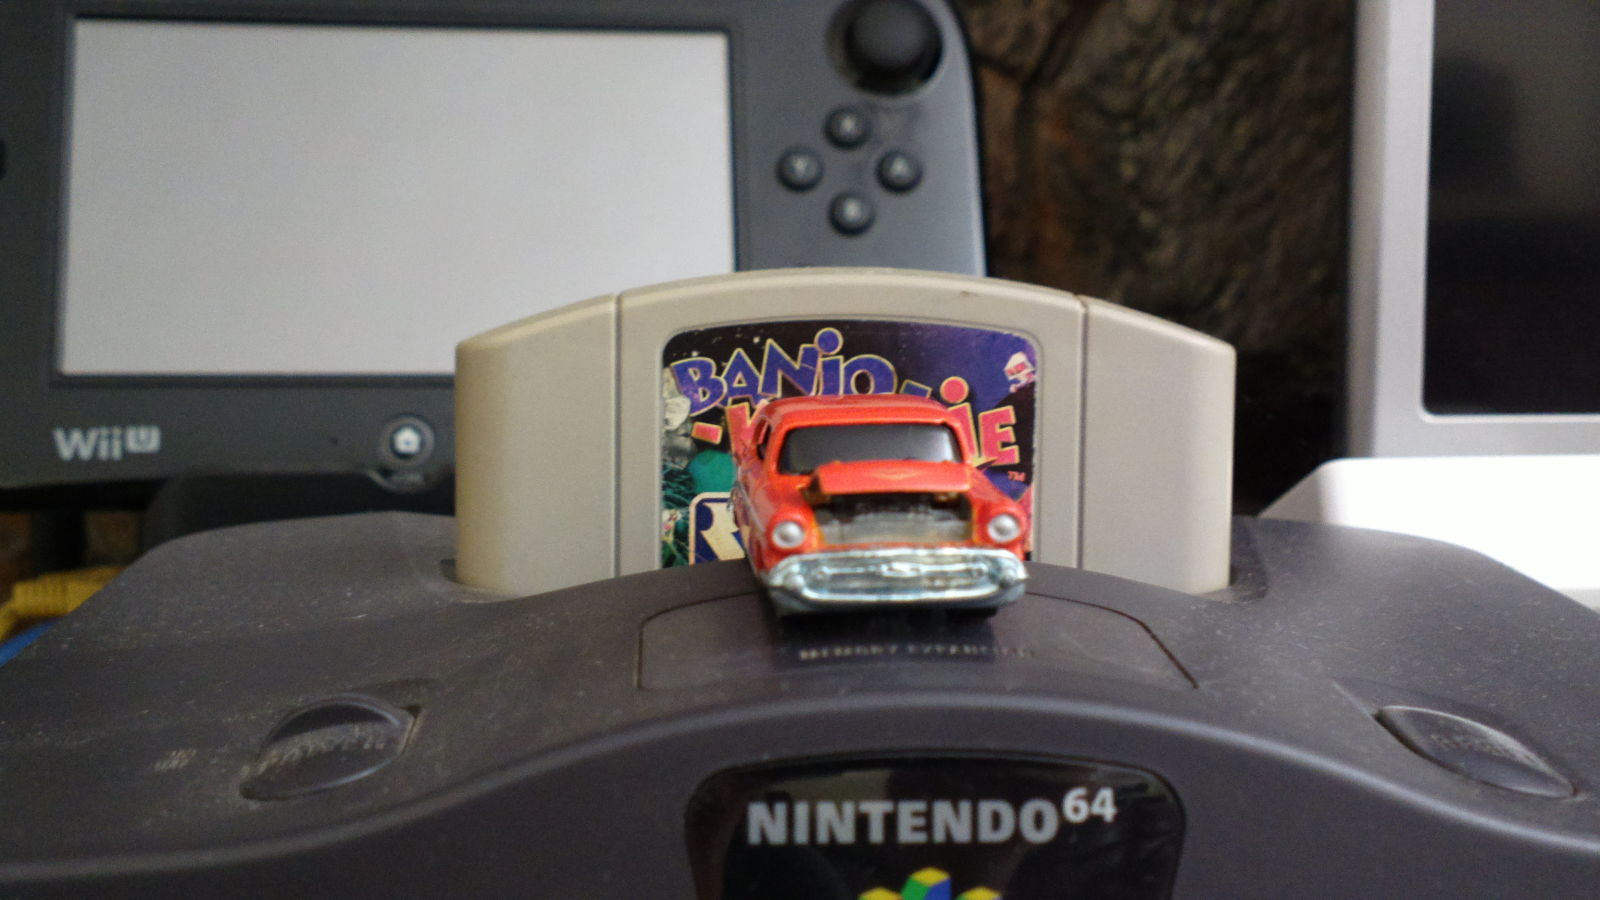 Illustration for article titled Three Chevys and a Nintendo 64